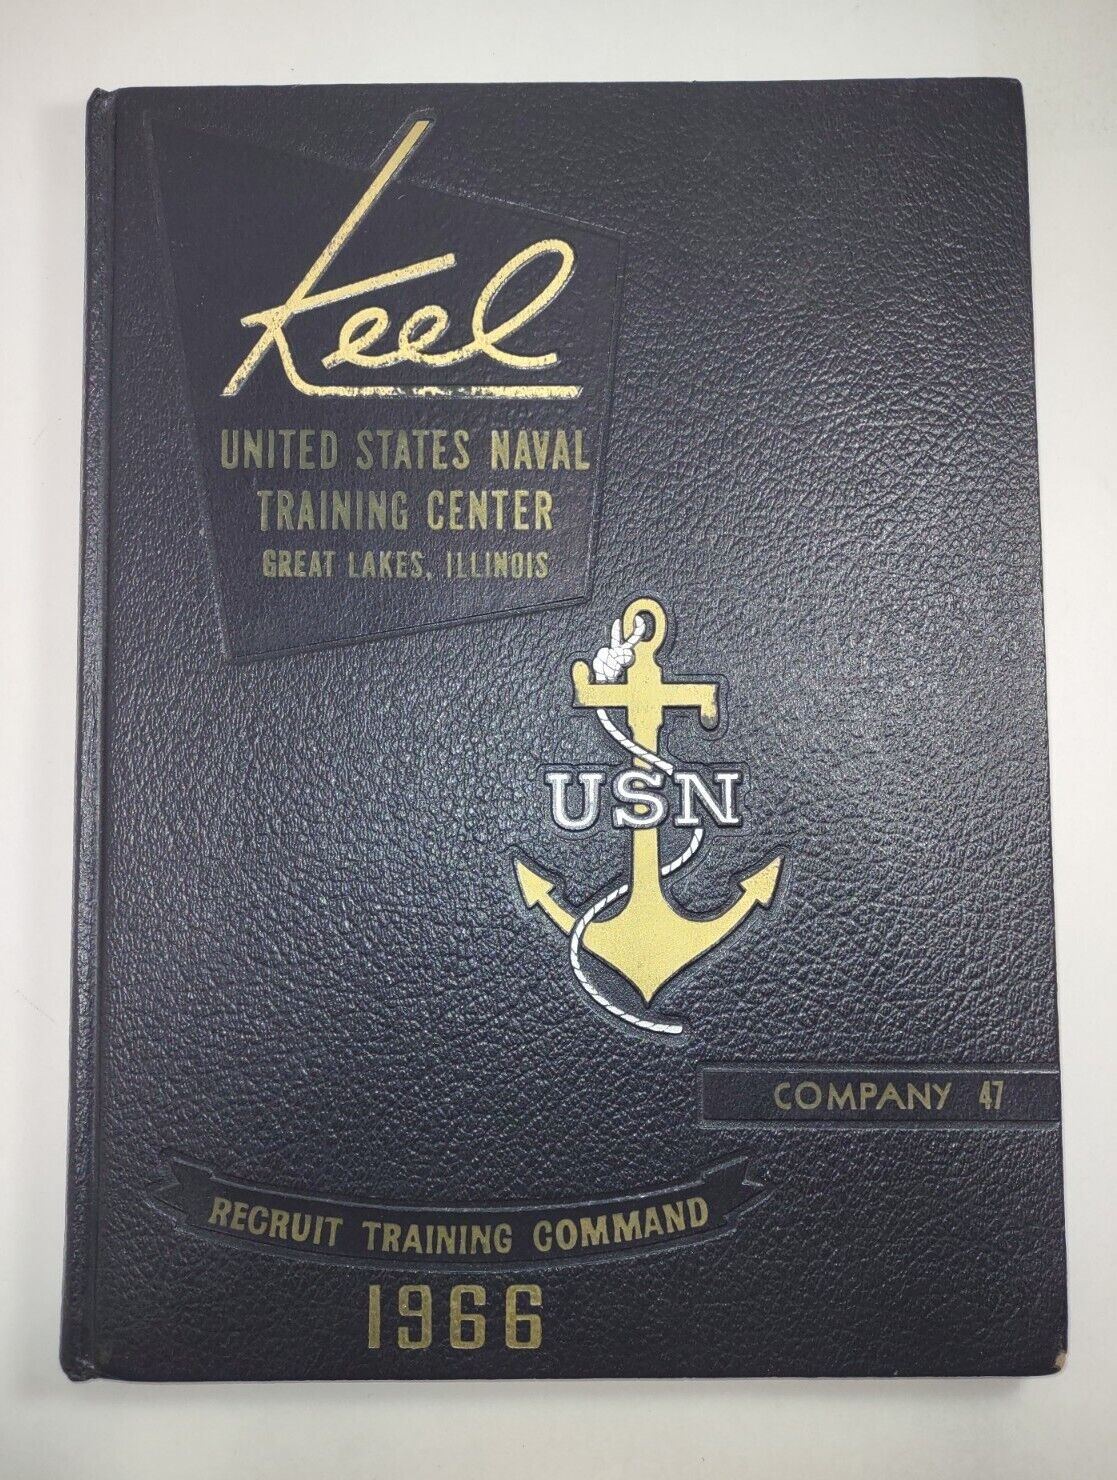 The Keel US Naval Academy Training Ctr Great Lakes IL Company 47 1966 Yearbook 